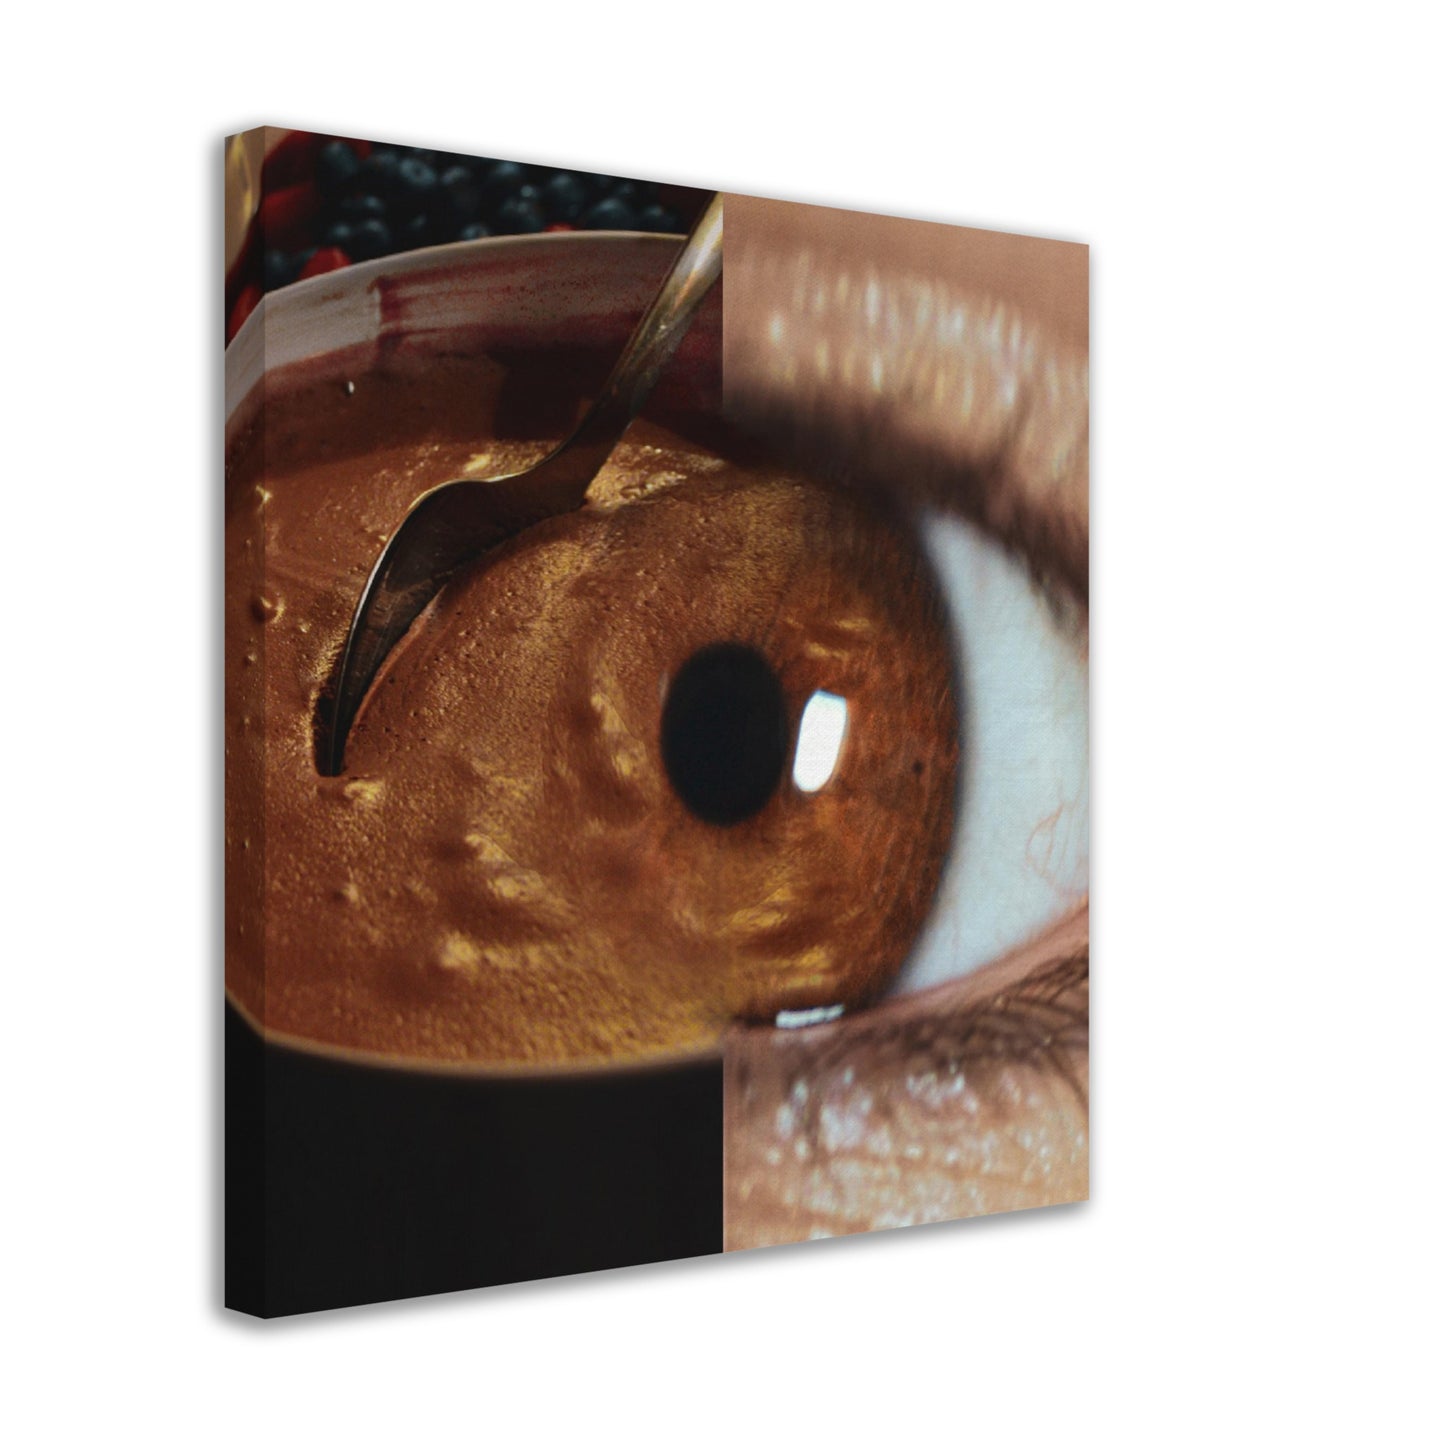 A Dessert To D-eye For - Canvas Print